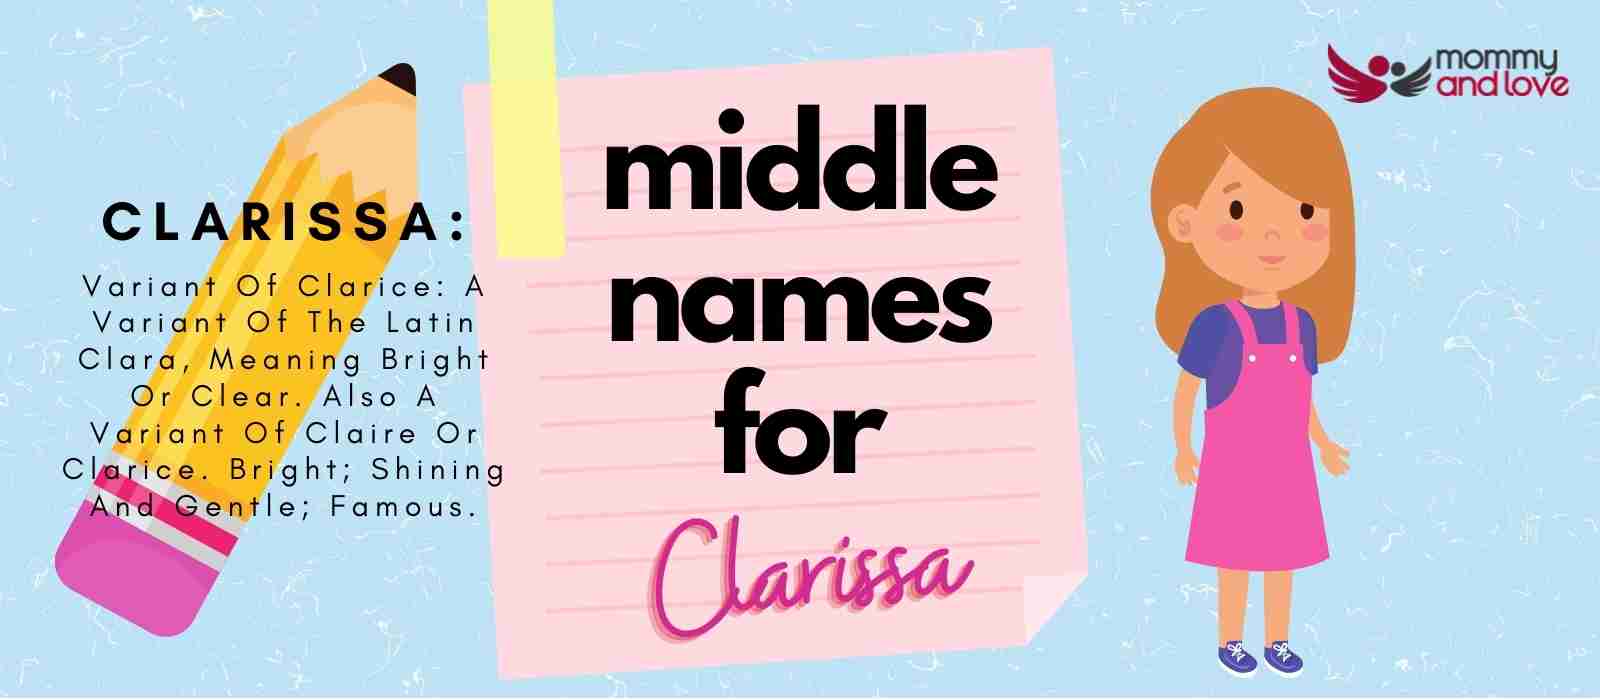 Middle Names for Clarissa